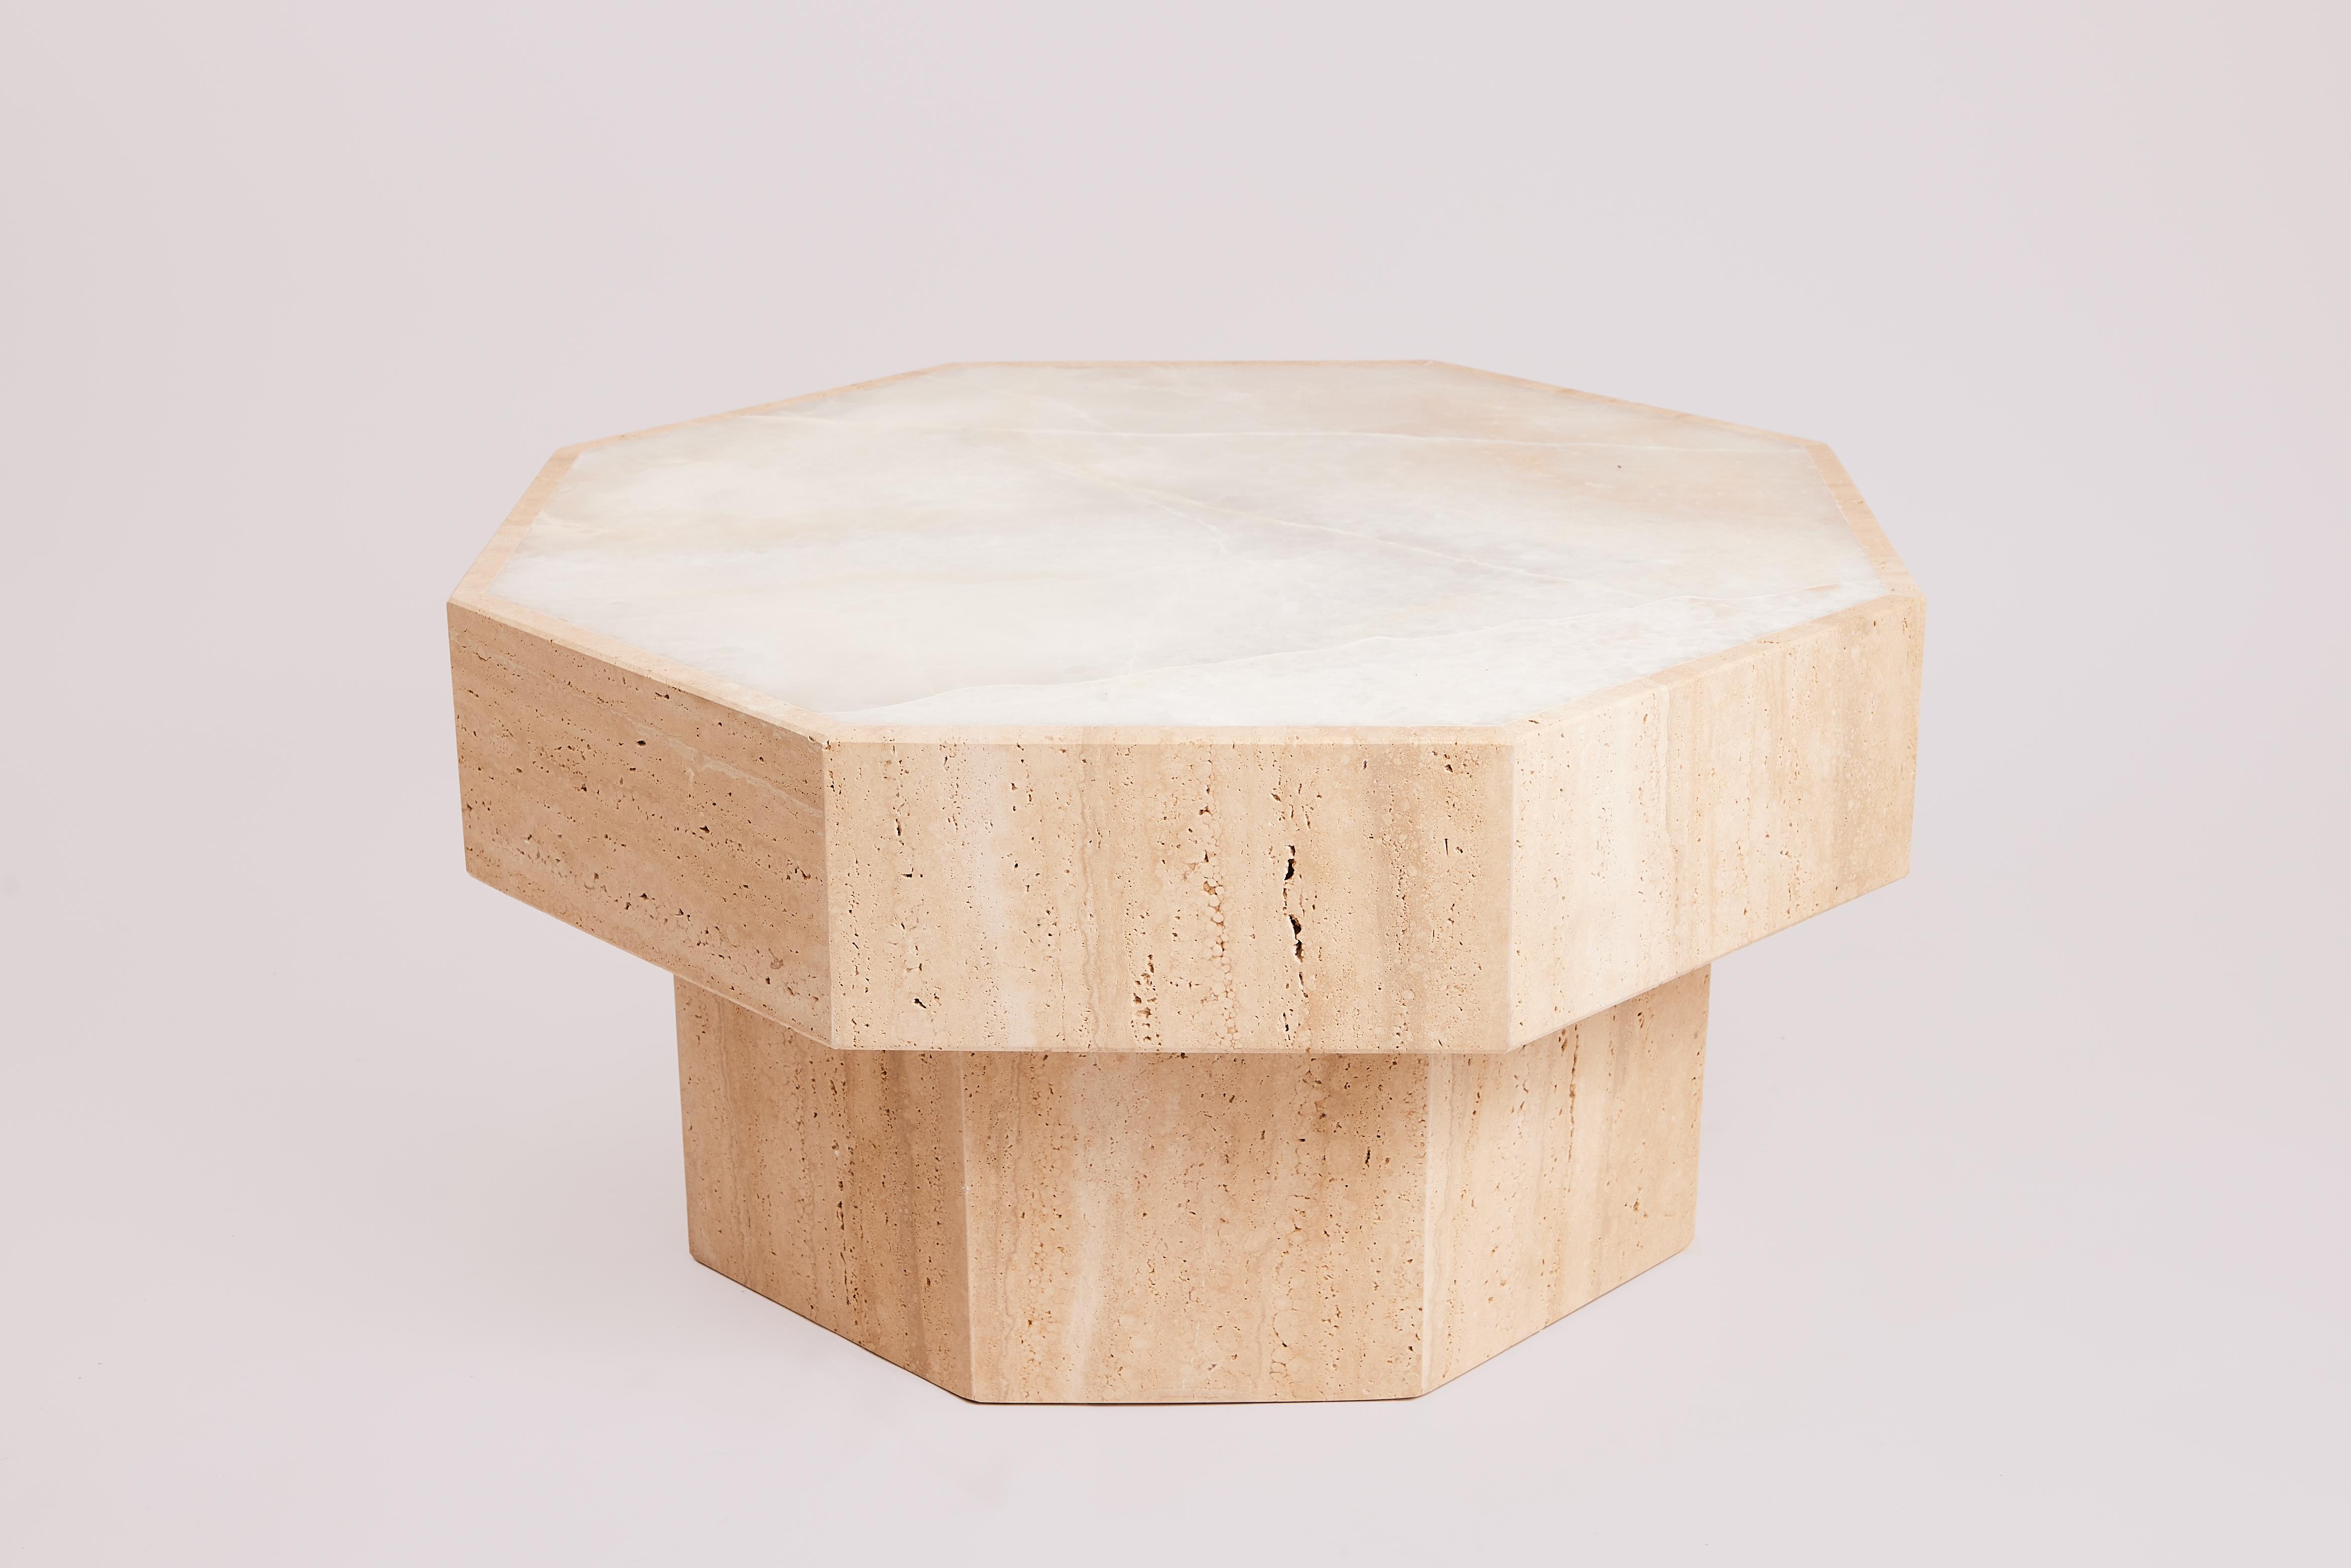 Simone Coffee Table by Studio Gaia Paris
Dimensions: ⌀ 80 x H 38 cm
Materials: White Onyx and Travertine.


The Simone coffee table, in onyx and travertine, features two types of natural stones known for their unique beauty and durable properties.